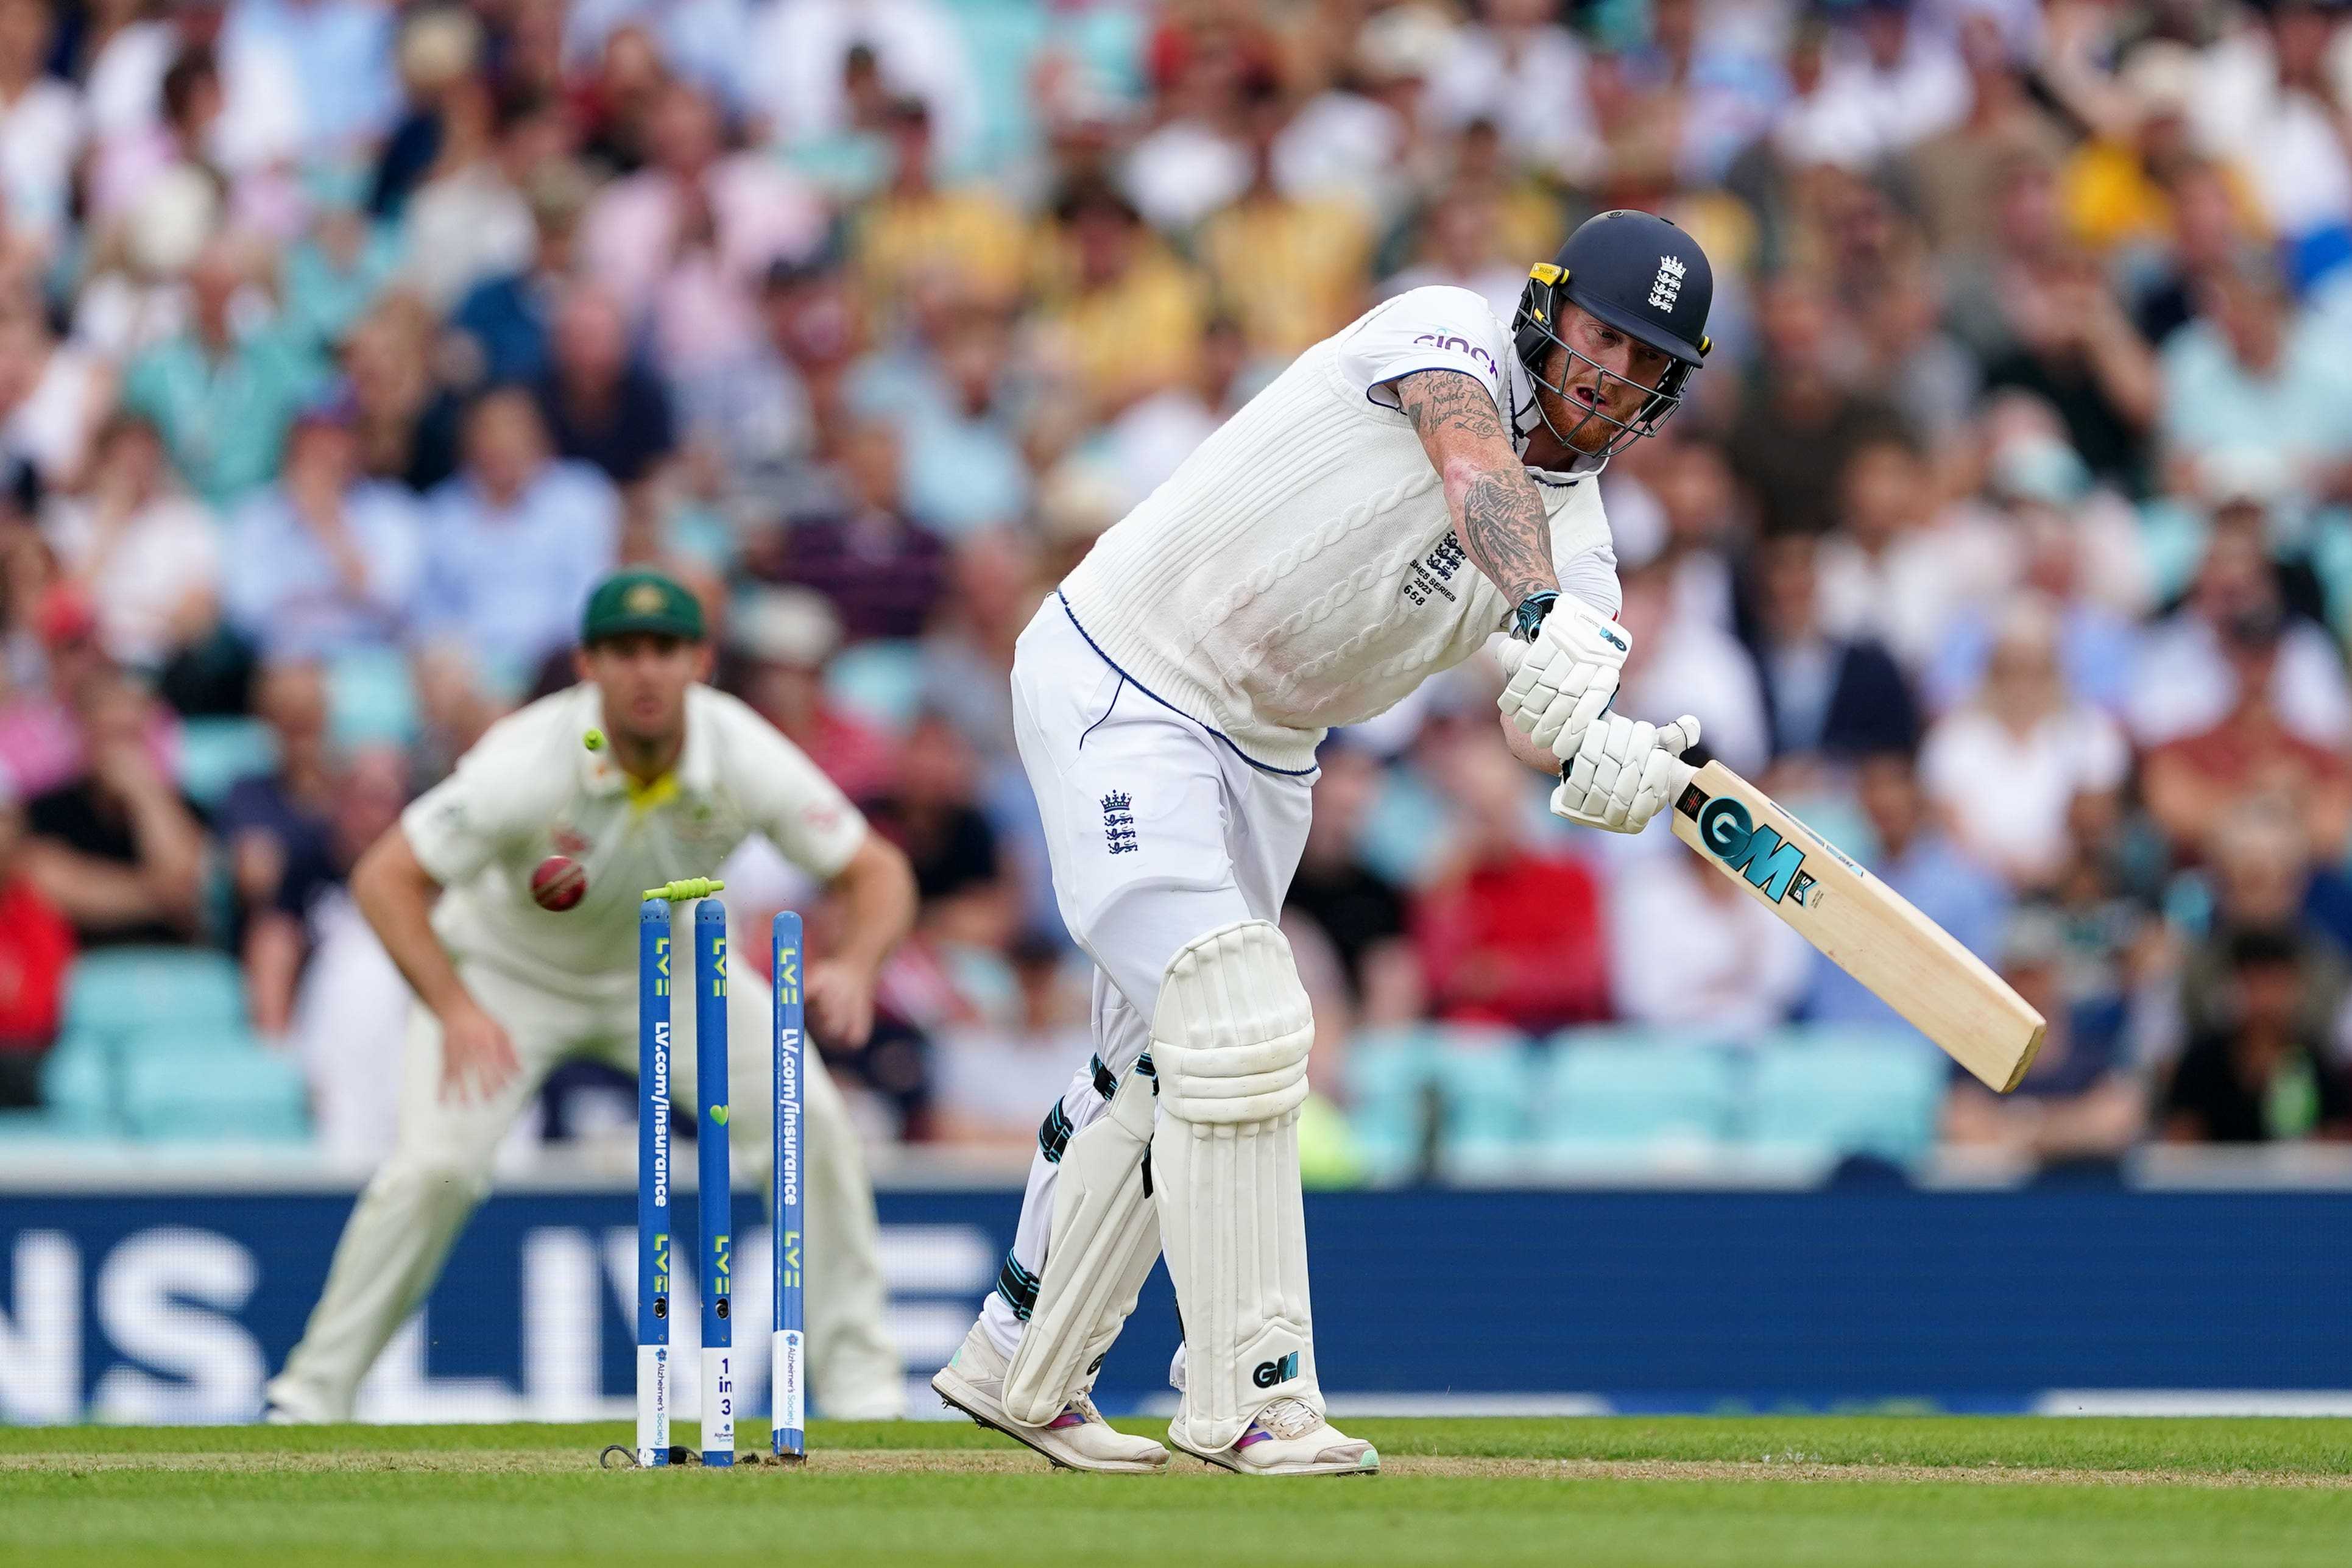 Live Ashes Streaming - How to Watch and Listen to Live Commentary from the Ashes Tests